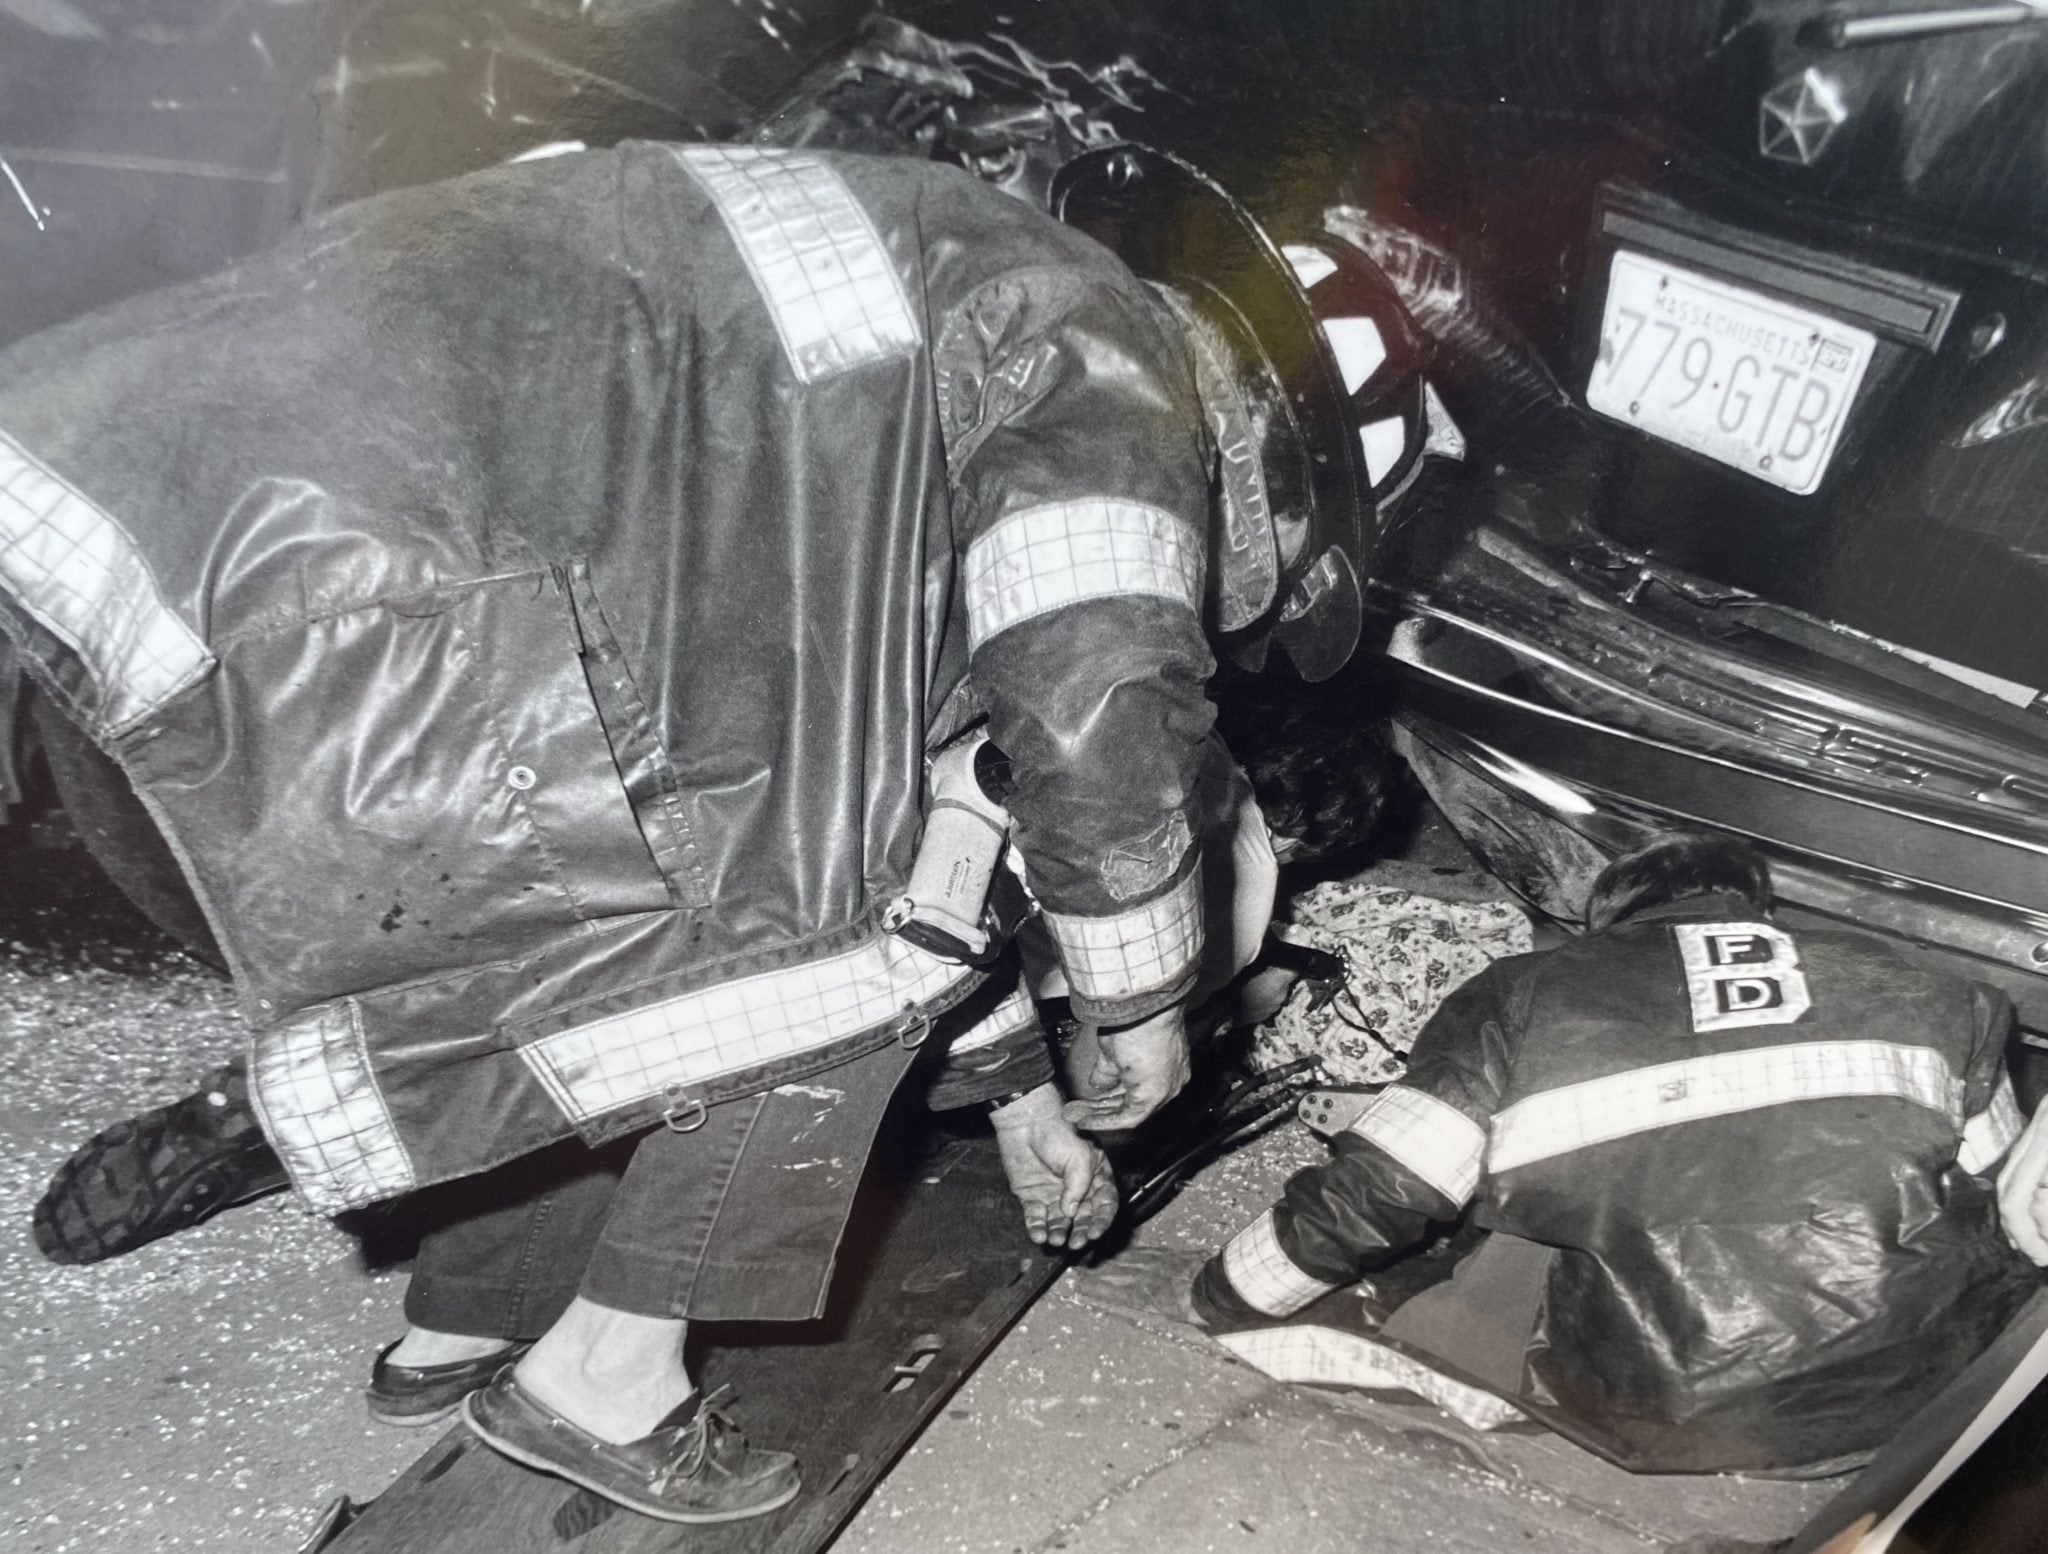 The legend of Ed Loder: Boston Fire Department’s most decorated firefighter